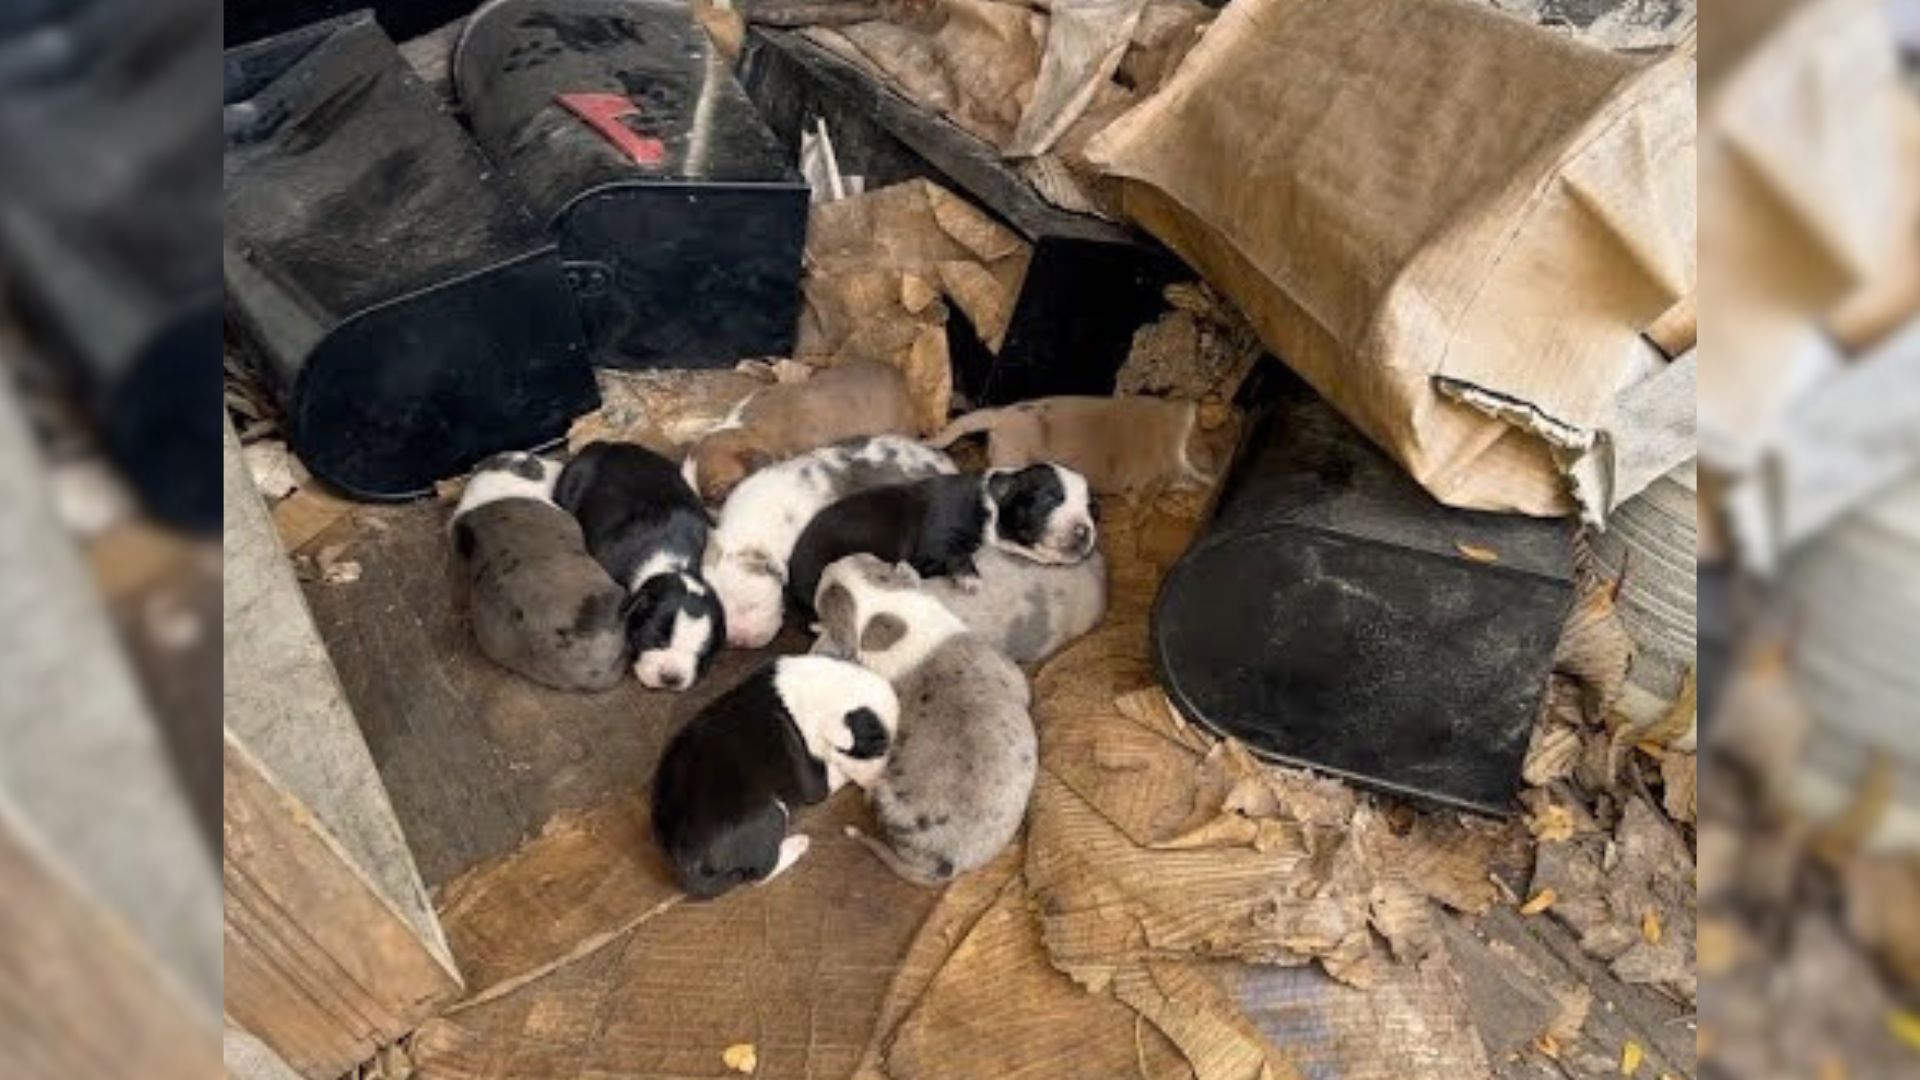 Amazing Rescuers Saved A Mama Dog Who Was Very Protective Of Her Puppies